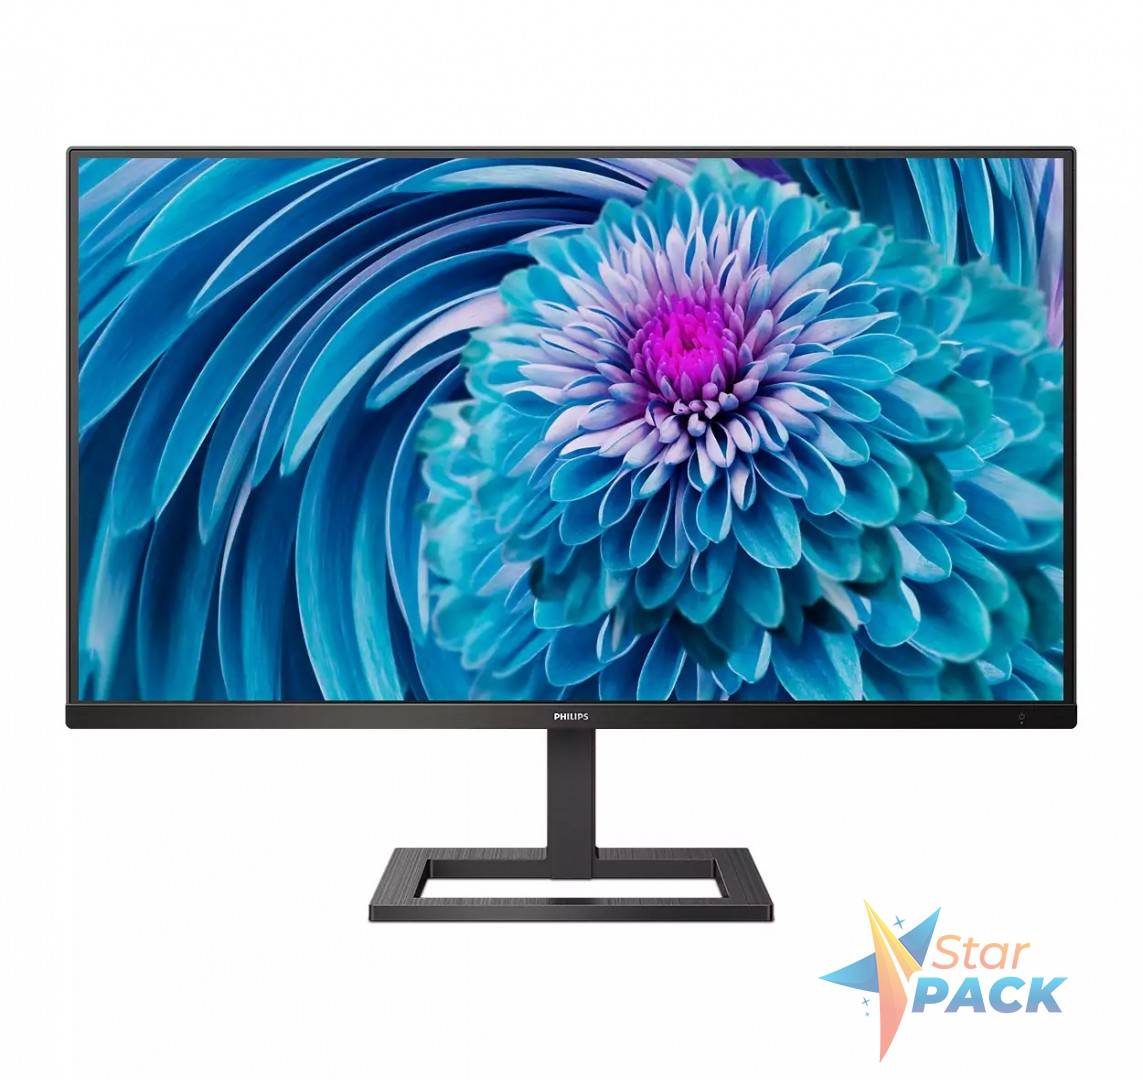 MONITOR PHILIPS 28 inch, home, office, IPS, 4K UHD, Ultra Wide, 300 cd/mp, 4 ms, HDMI x 2, DisplayPort